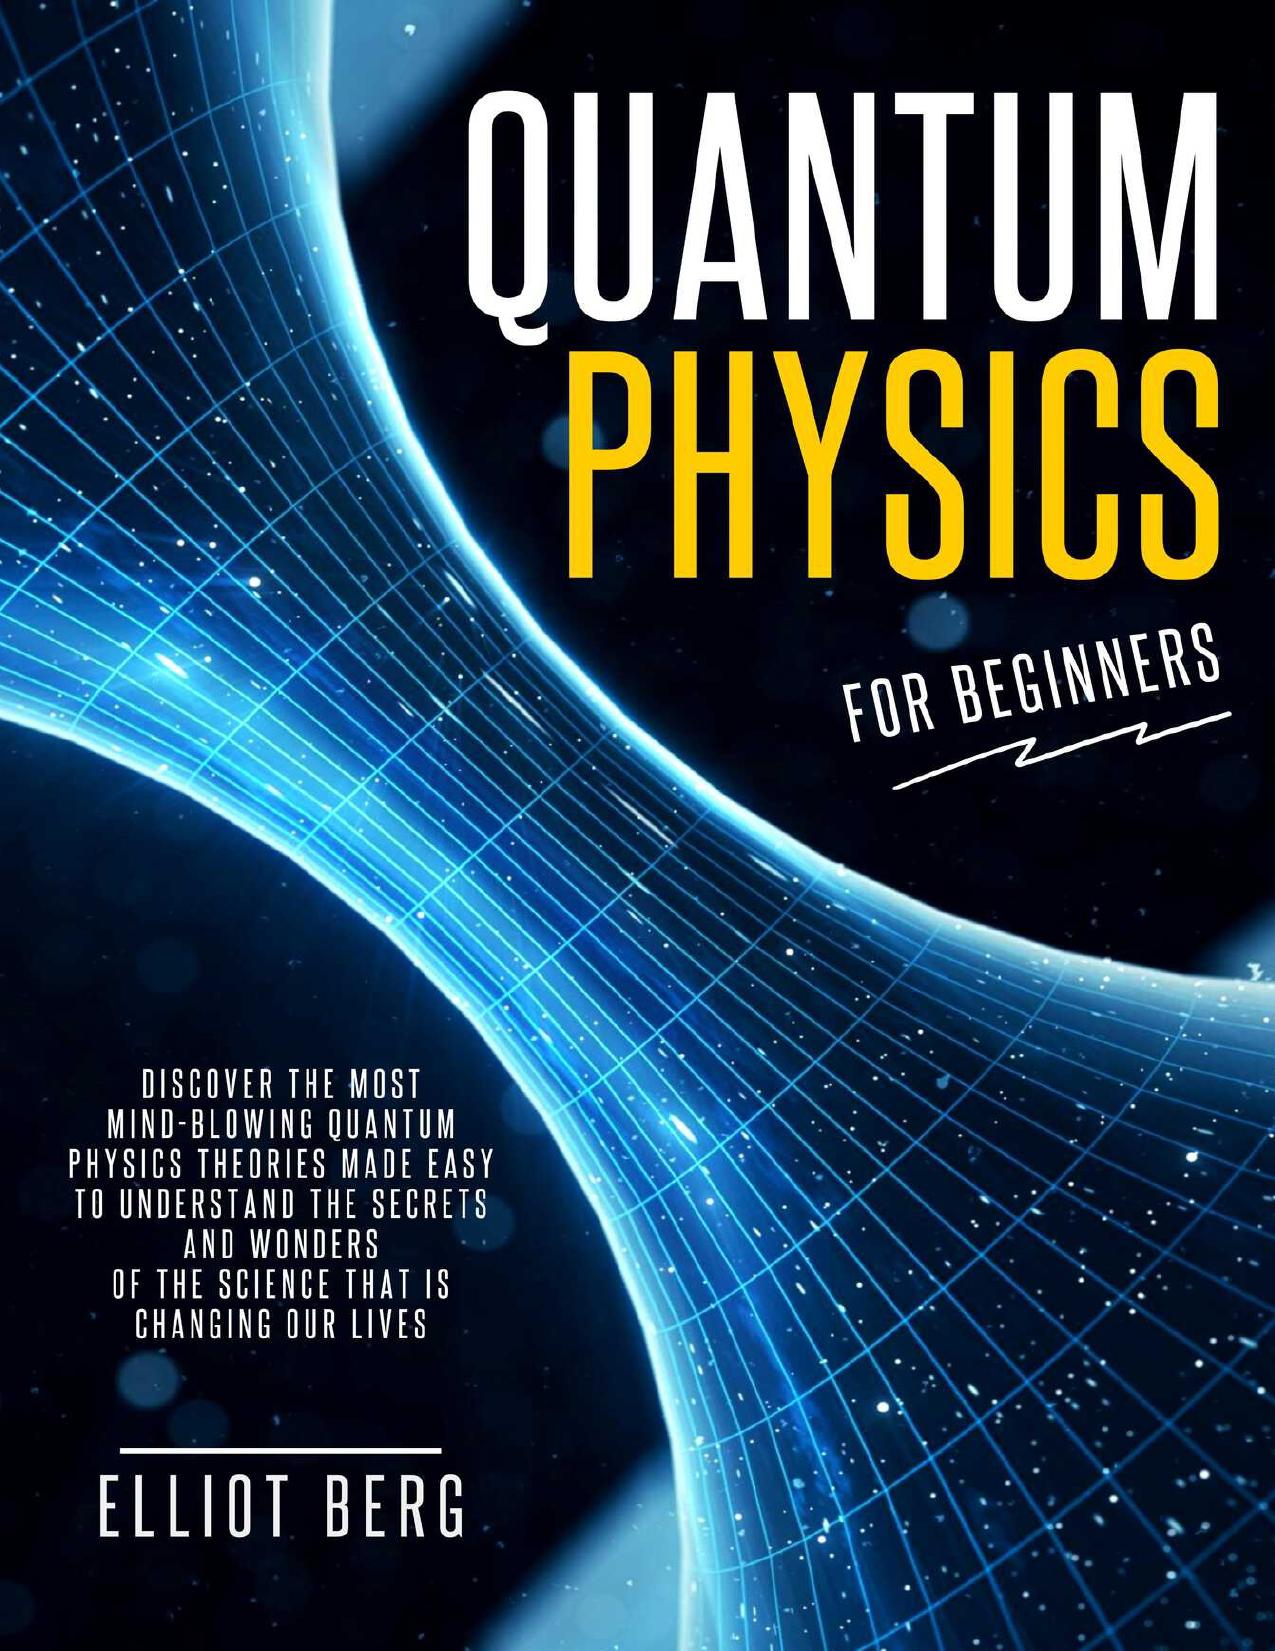 Quantum Physics for Beginners: Discover The Most Mind-Blowing Quantum Physics Theories Made Easy to Understand the Secrets and Wonders of the Science that is Changing our Lives by Berg Elliot